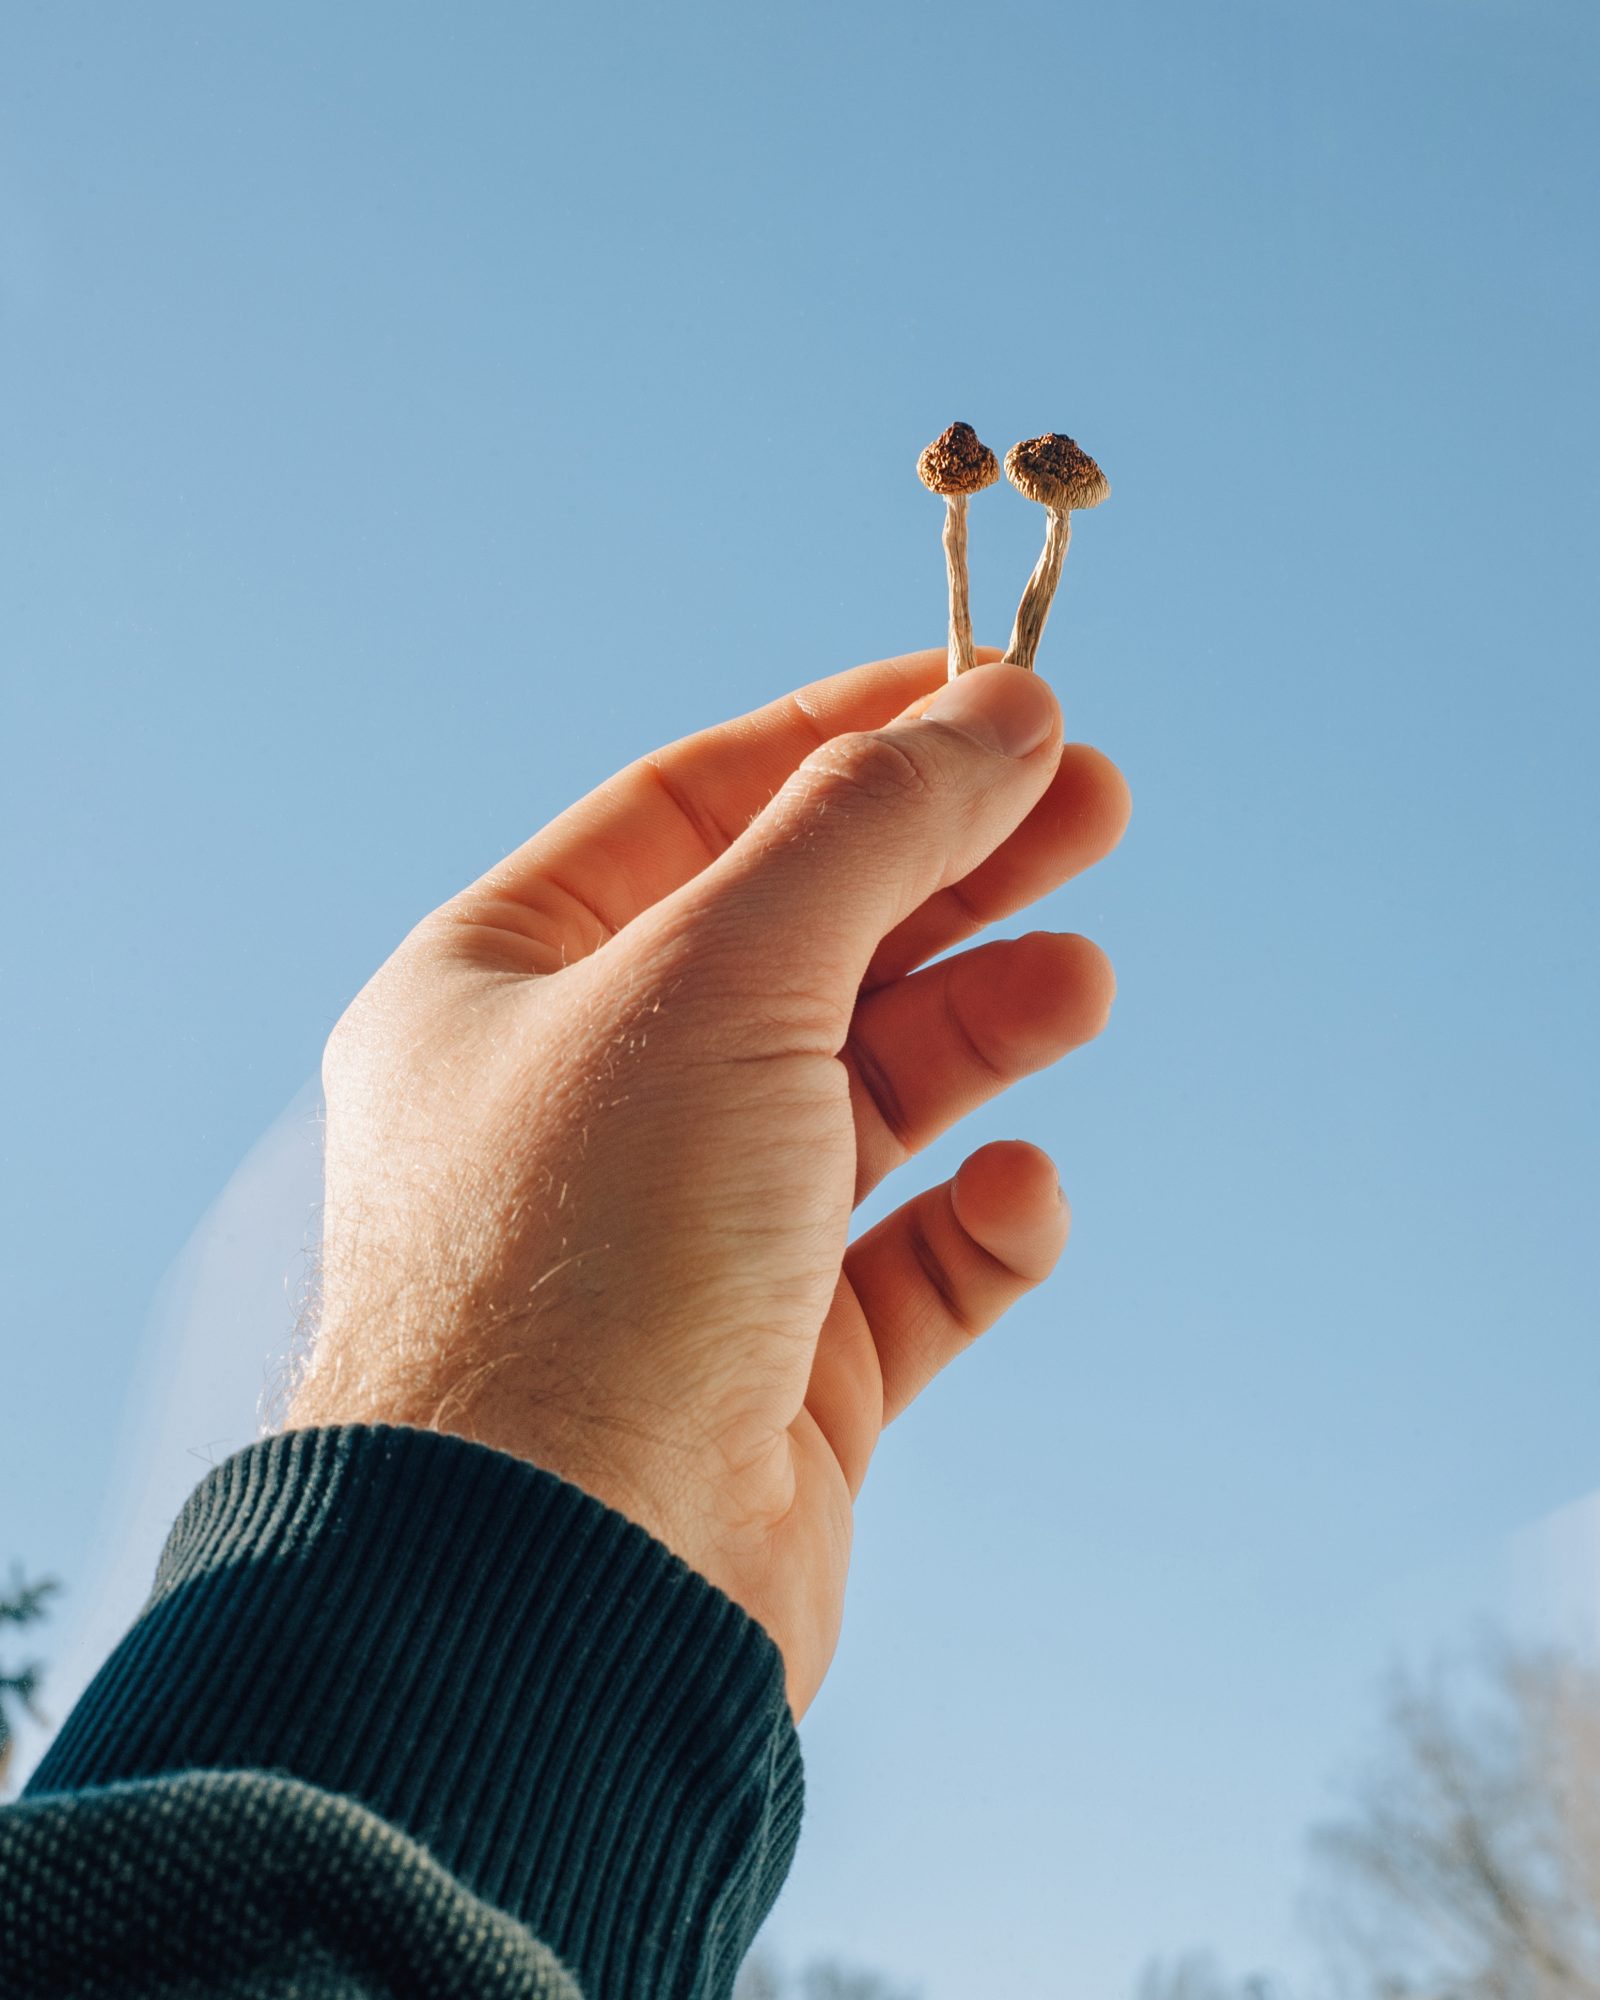 Man holding two liberty cap mushrooms up in the air, against a blue sky